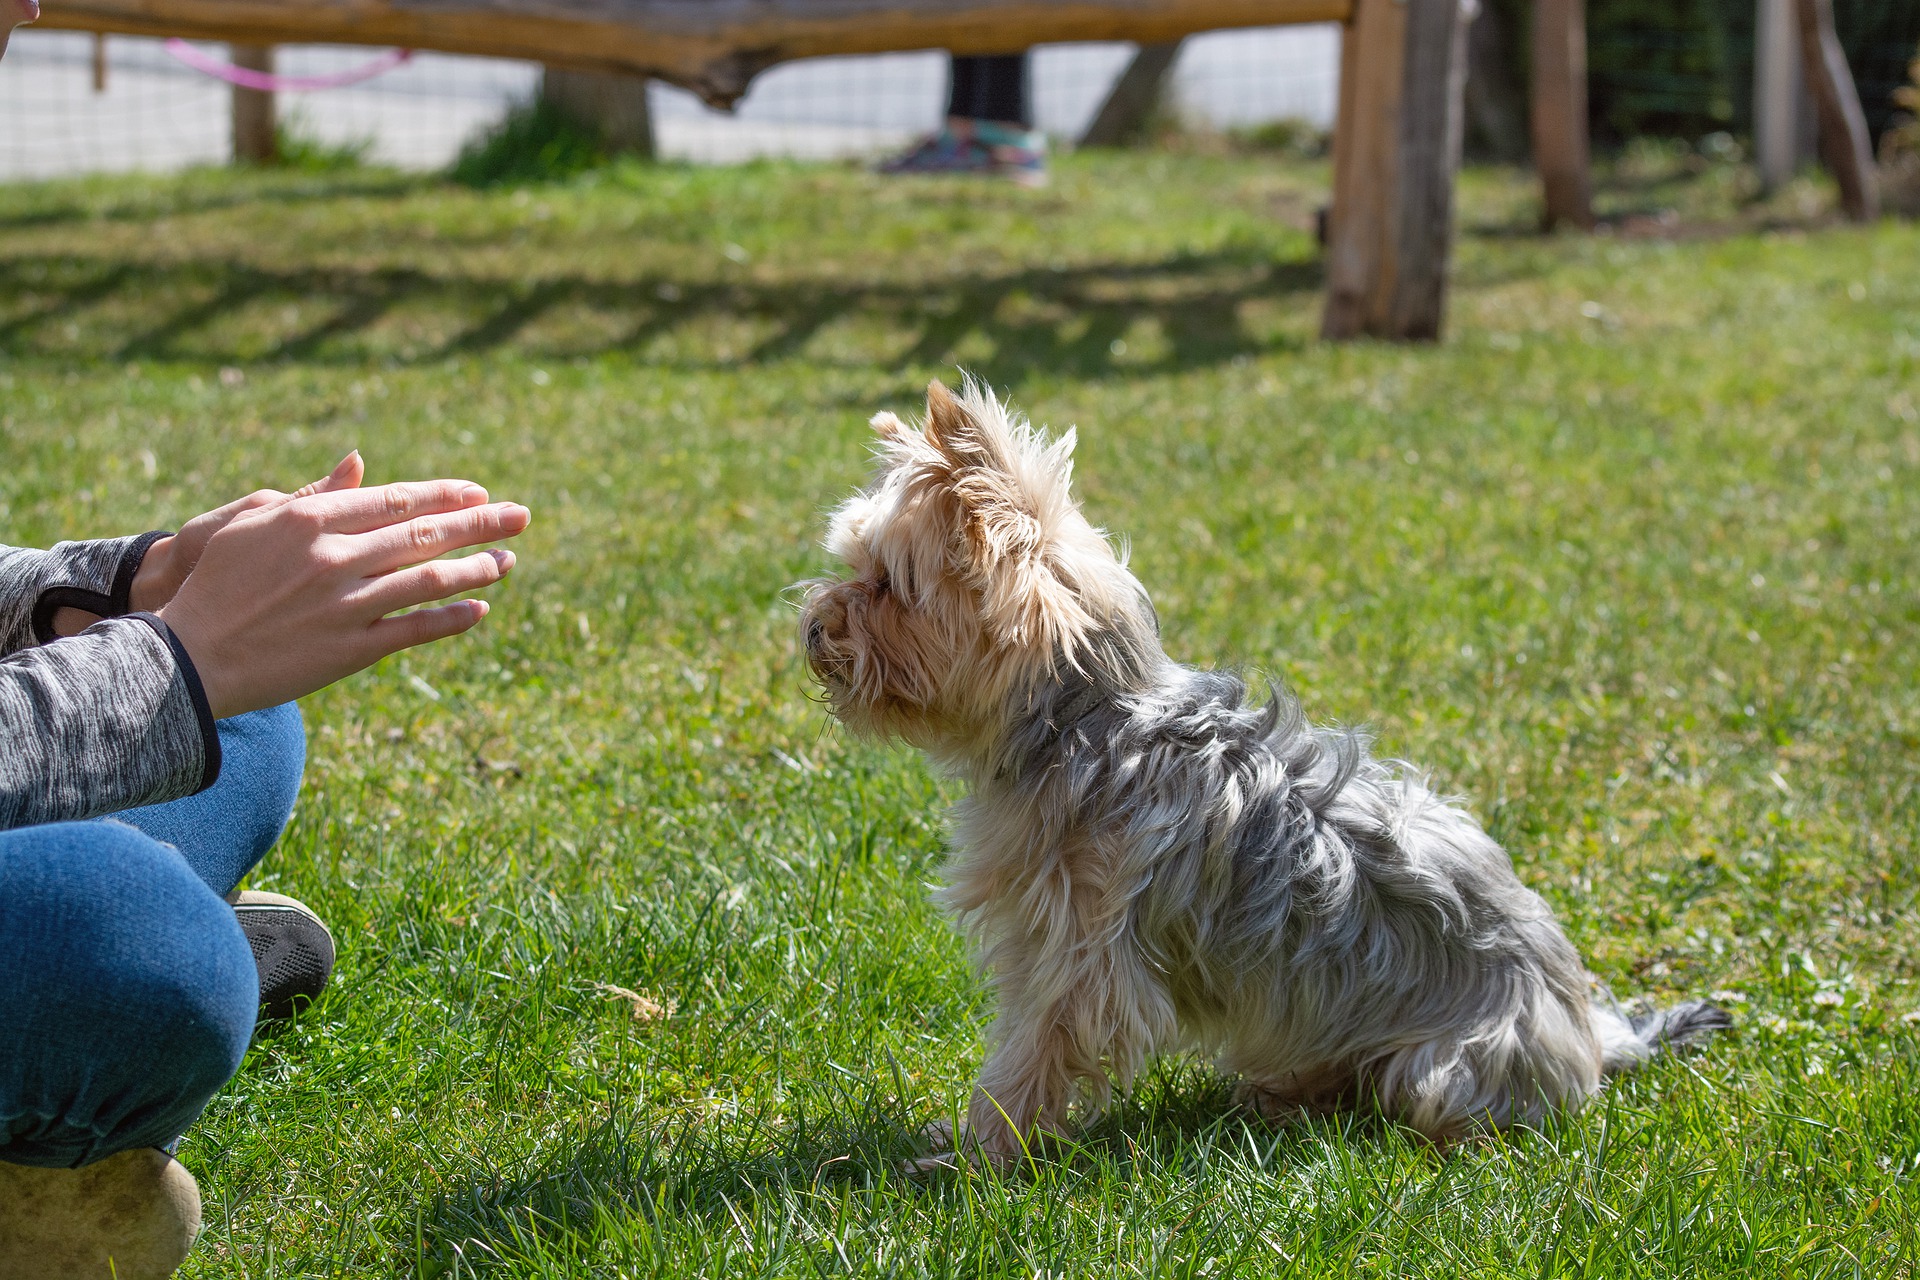 How to train your Yorkie to sit – 3 easy steps